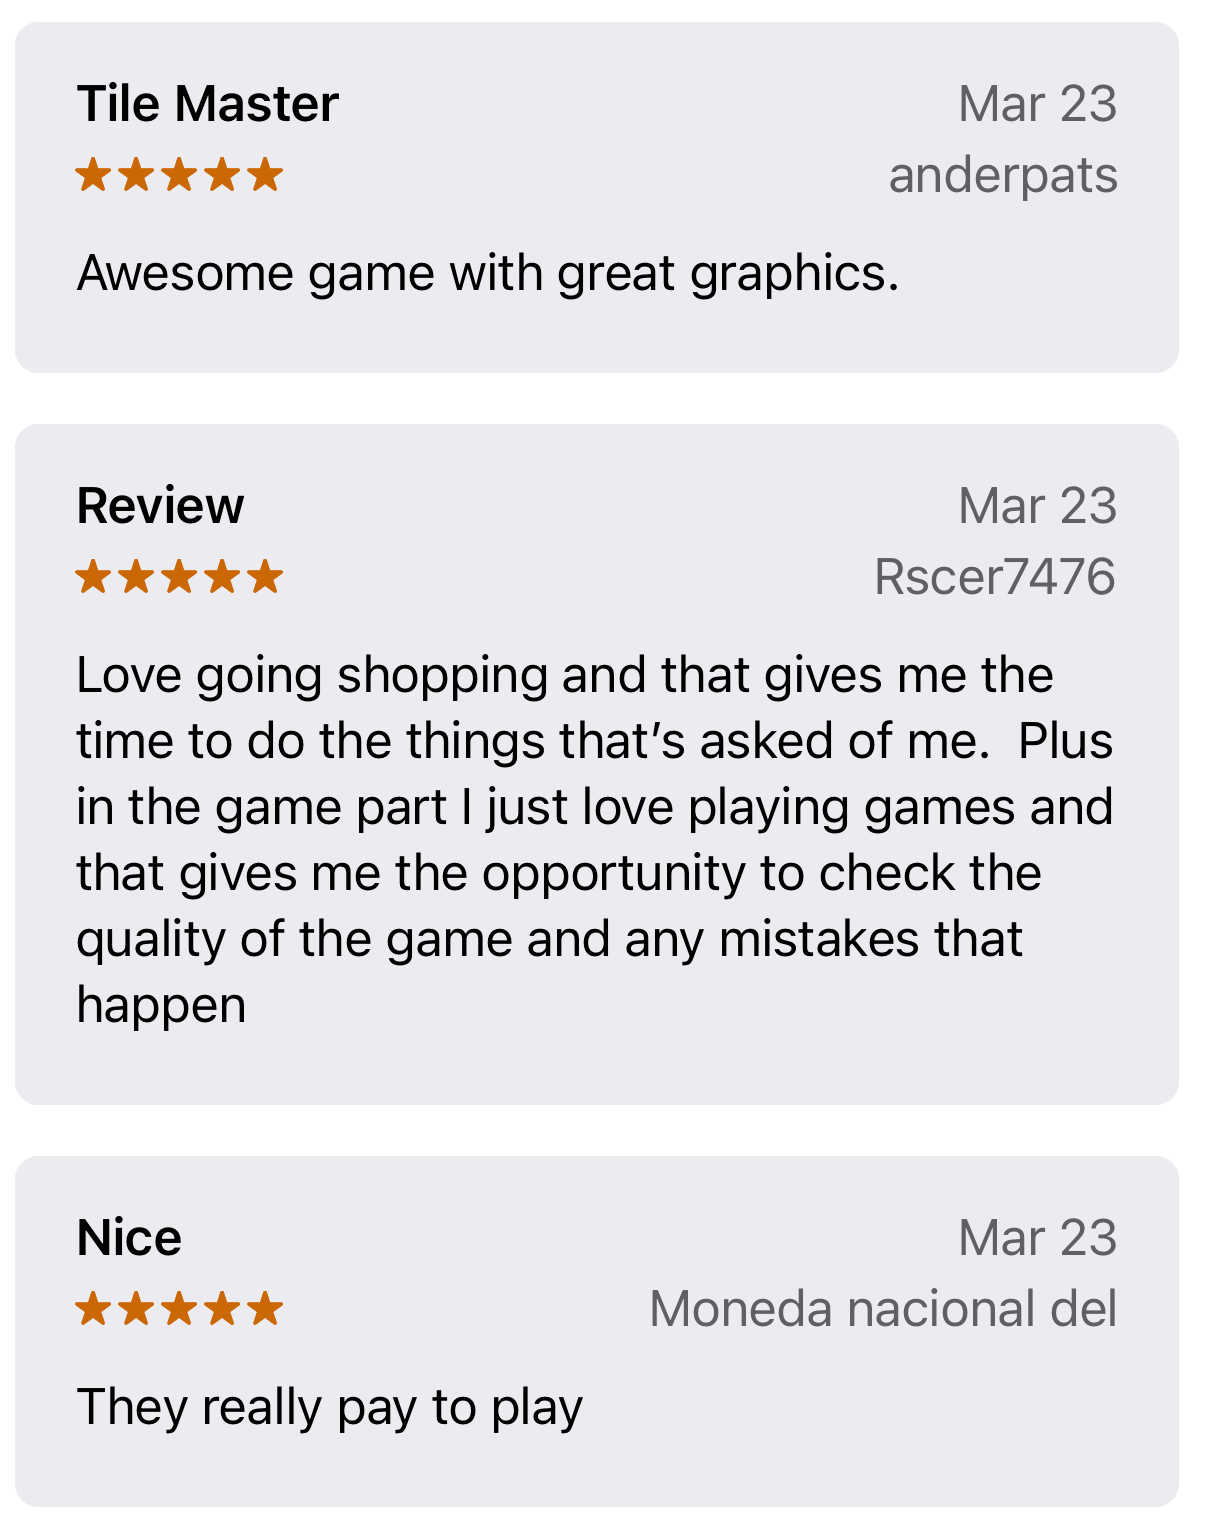 Three 5-star Apple App Store reviews from Test'em All users happy with the gaming graphics, the shopping tasks, and payment. 